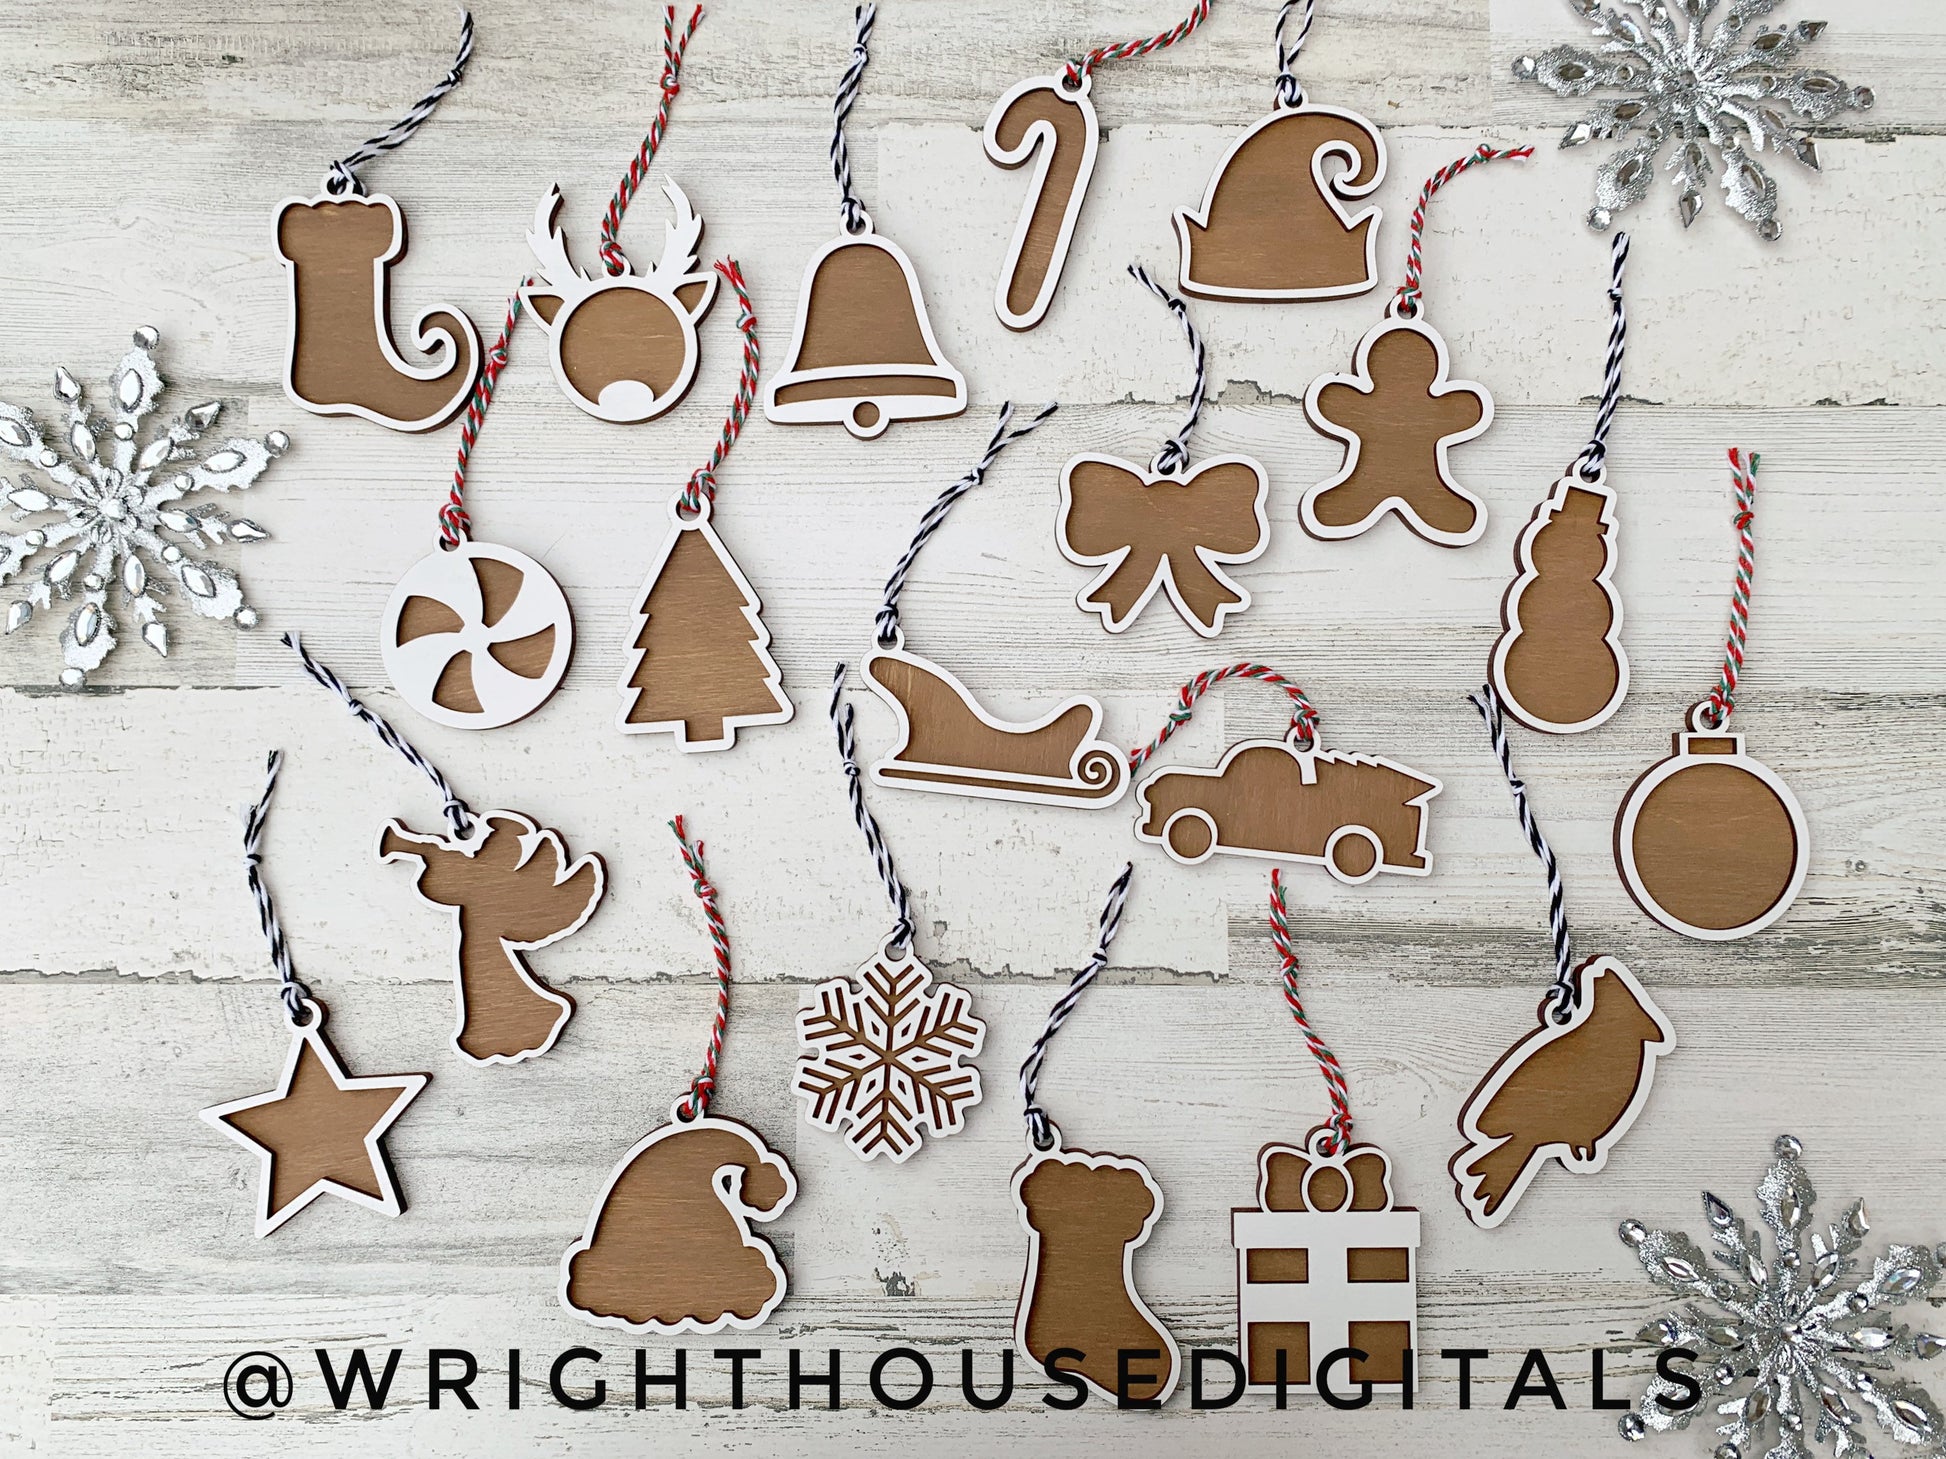 DIGITAL FILE - Gingerbread Christmas Cookie Ornaments - Layered - Rustic Farmhouse Style - SVG Cut File For Glowforge - Cut Files For Lasers